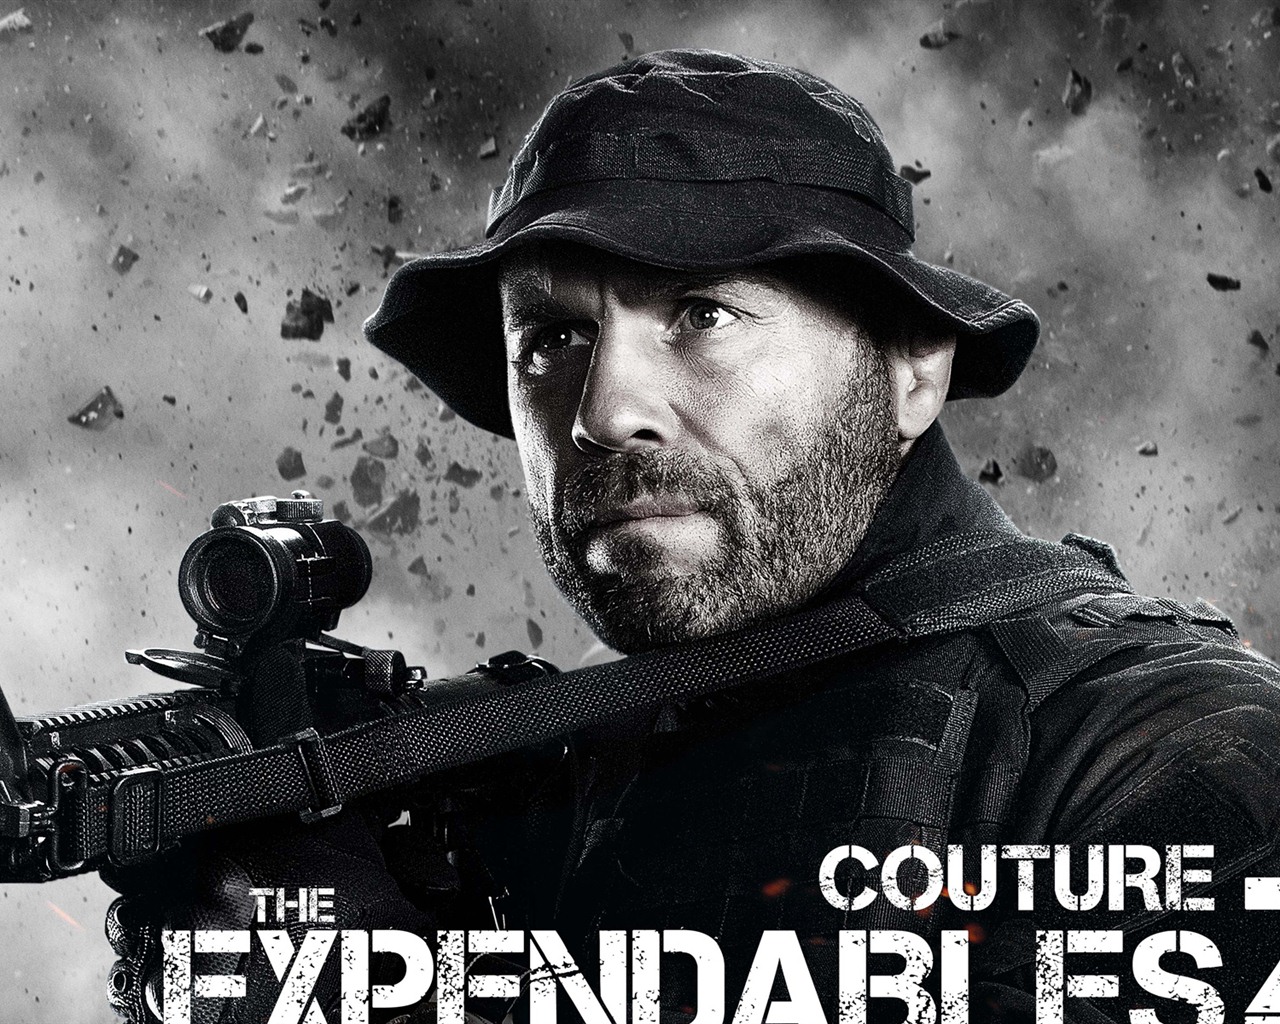 2012 The Expendables 2 敢死队2 高清壁纸8 - 1280x1024